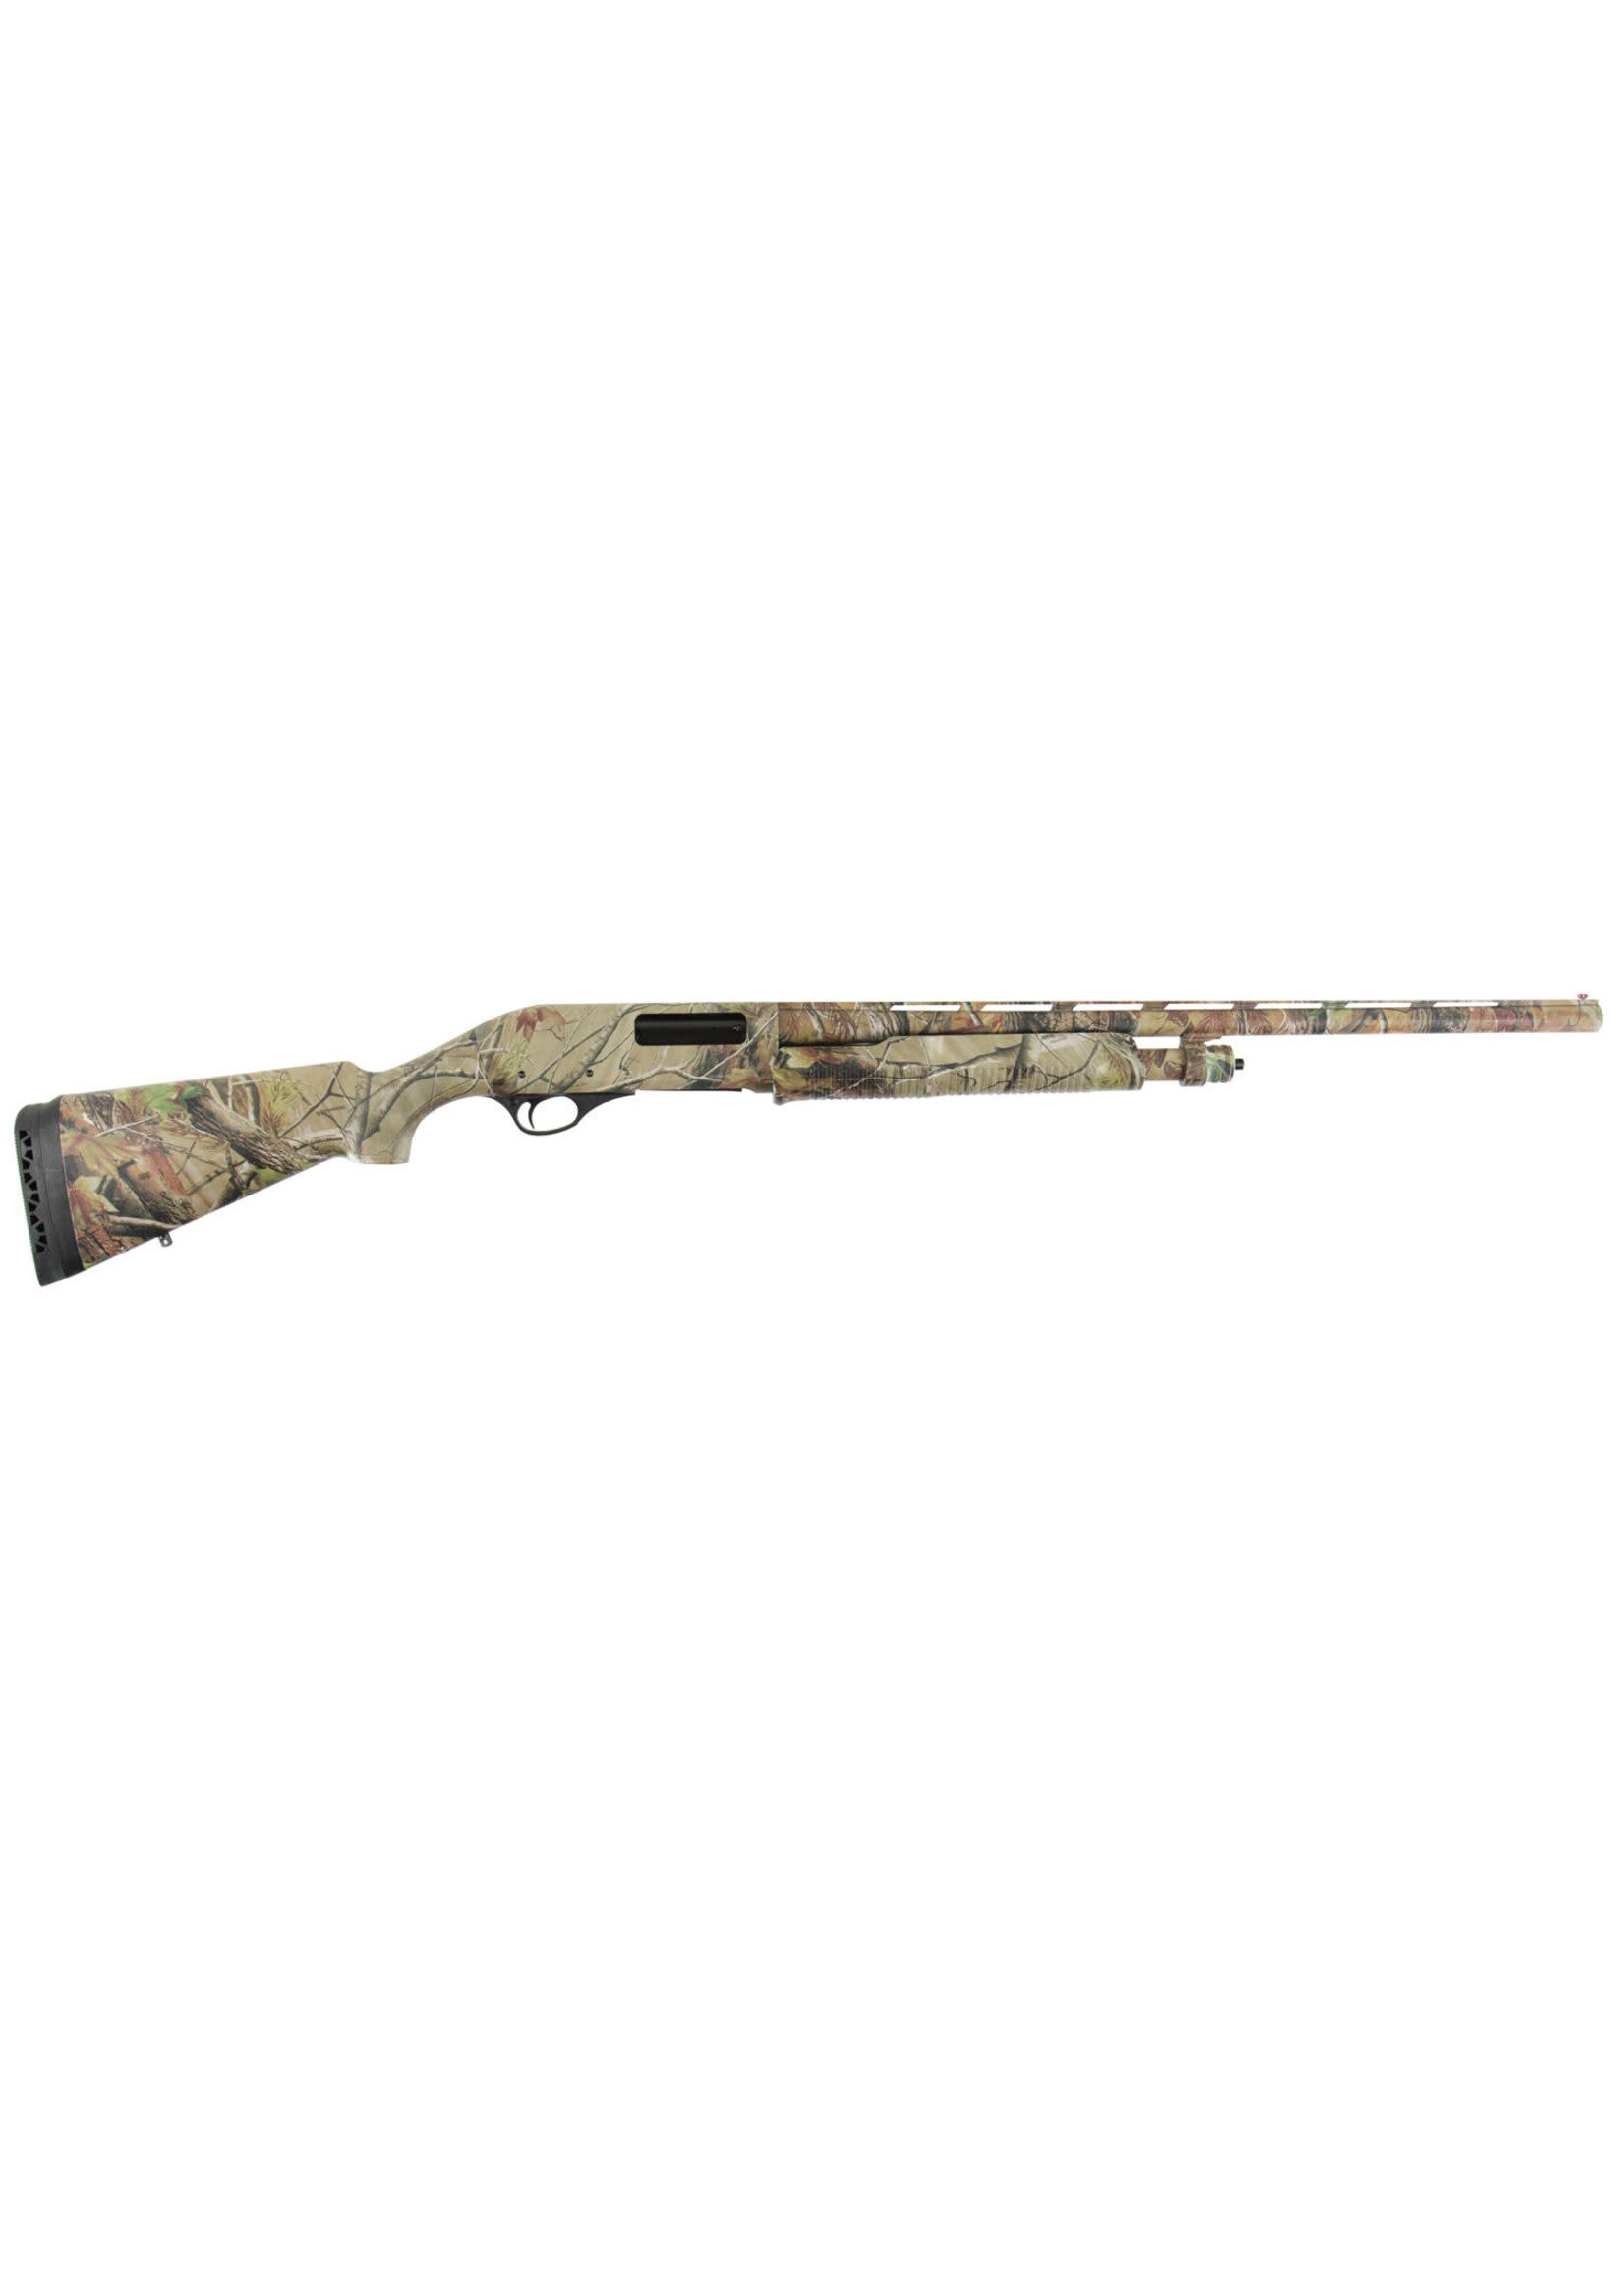 CZ USA CZ-USA 06533 CZ 612 Magnum Turkey 12 Gauge with 26" Barrel, 3.5" Chamber, 4+1 Capacity, Overall Hydrodipped Realtree AP Camo Finish & Synthetic Stock Right Hand (Full Size) Includes 2 Chokes